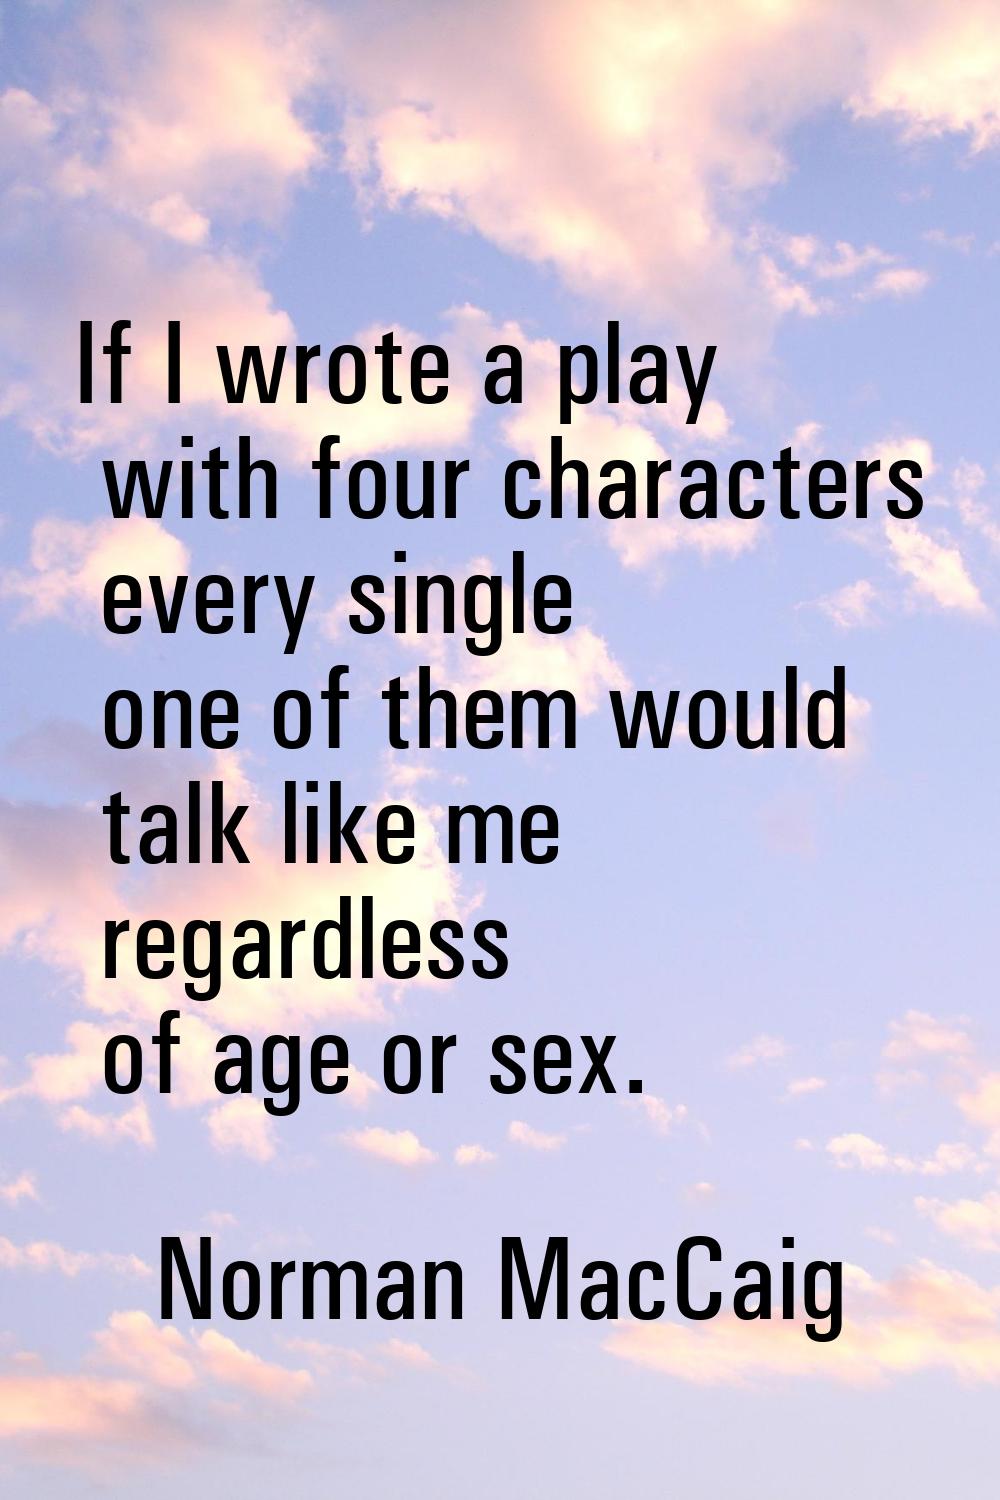 If I wrote a play with four characters every single one of them would talk like me regardless of ag